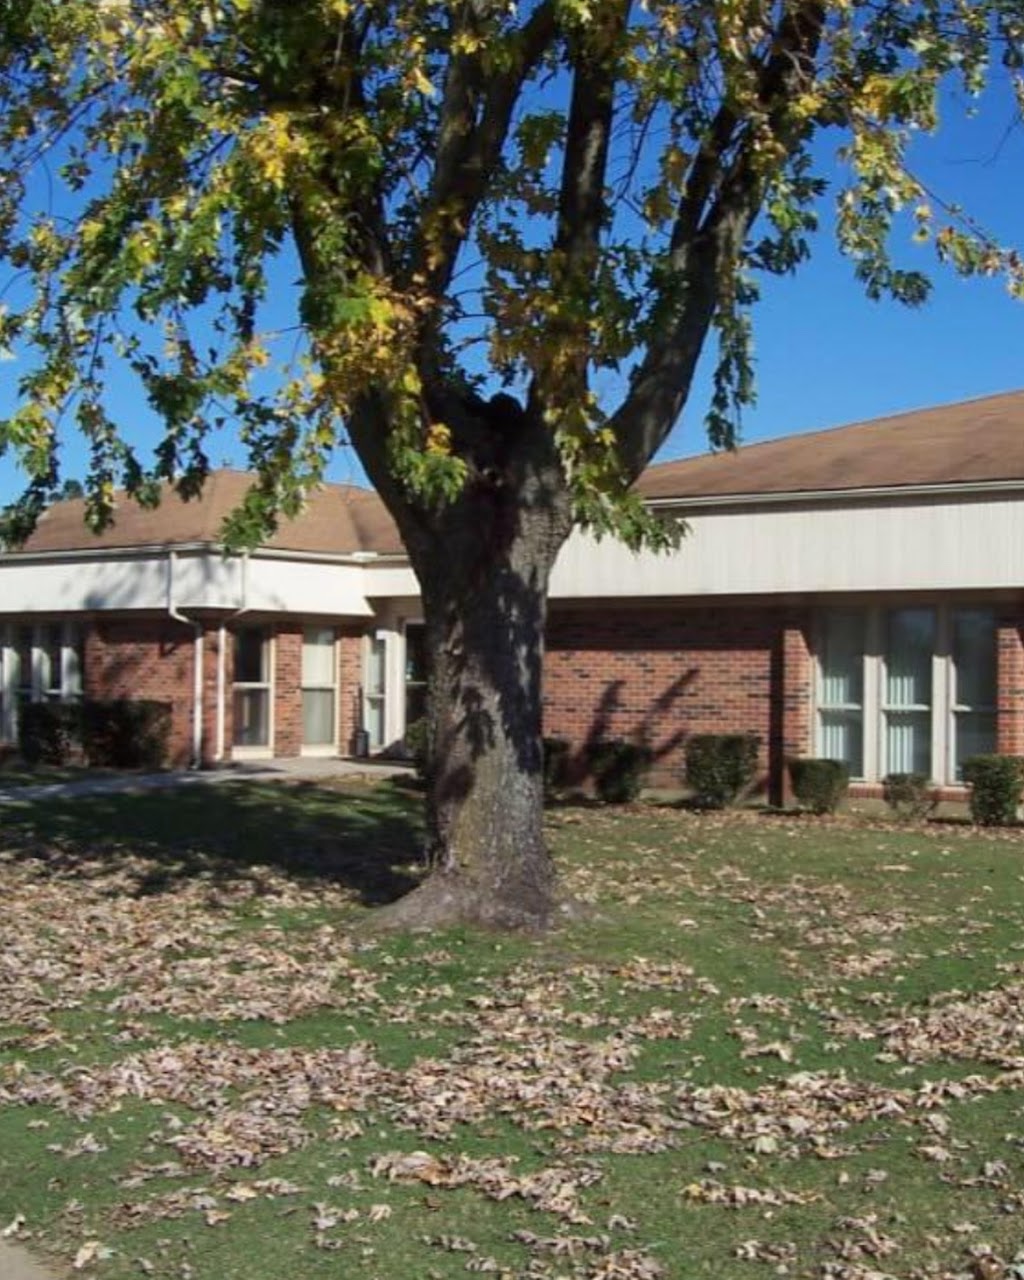 Photo of Housing Authority of the City of Malden. Affordable housing located at 109 WATSON DRIVE MALDEN, MO 63863